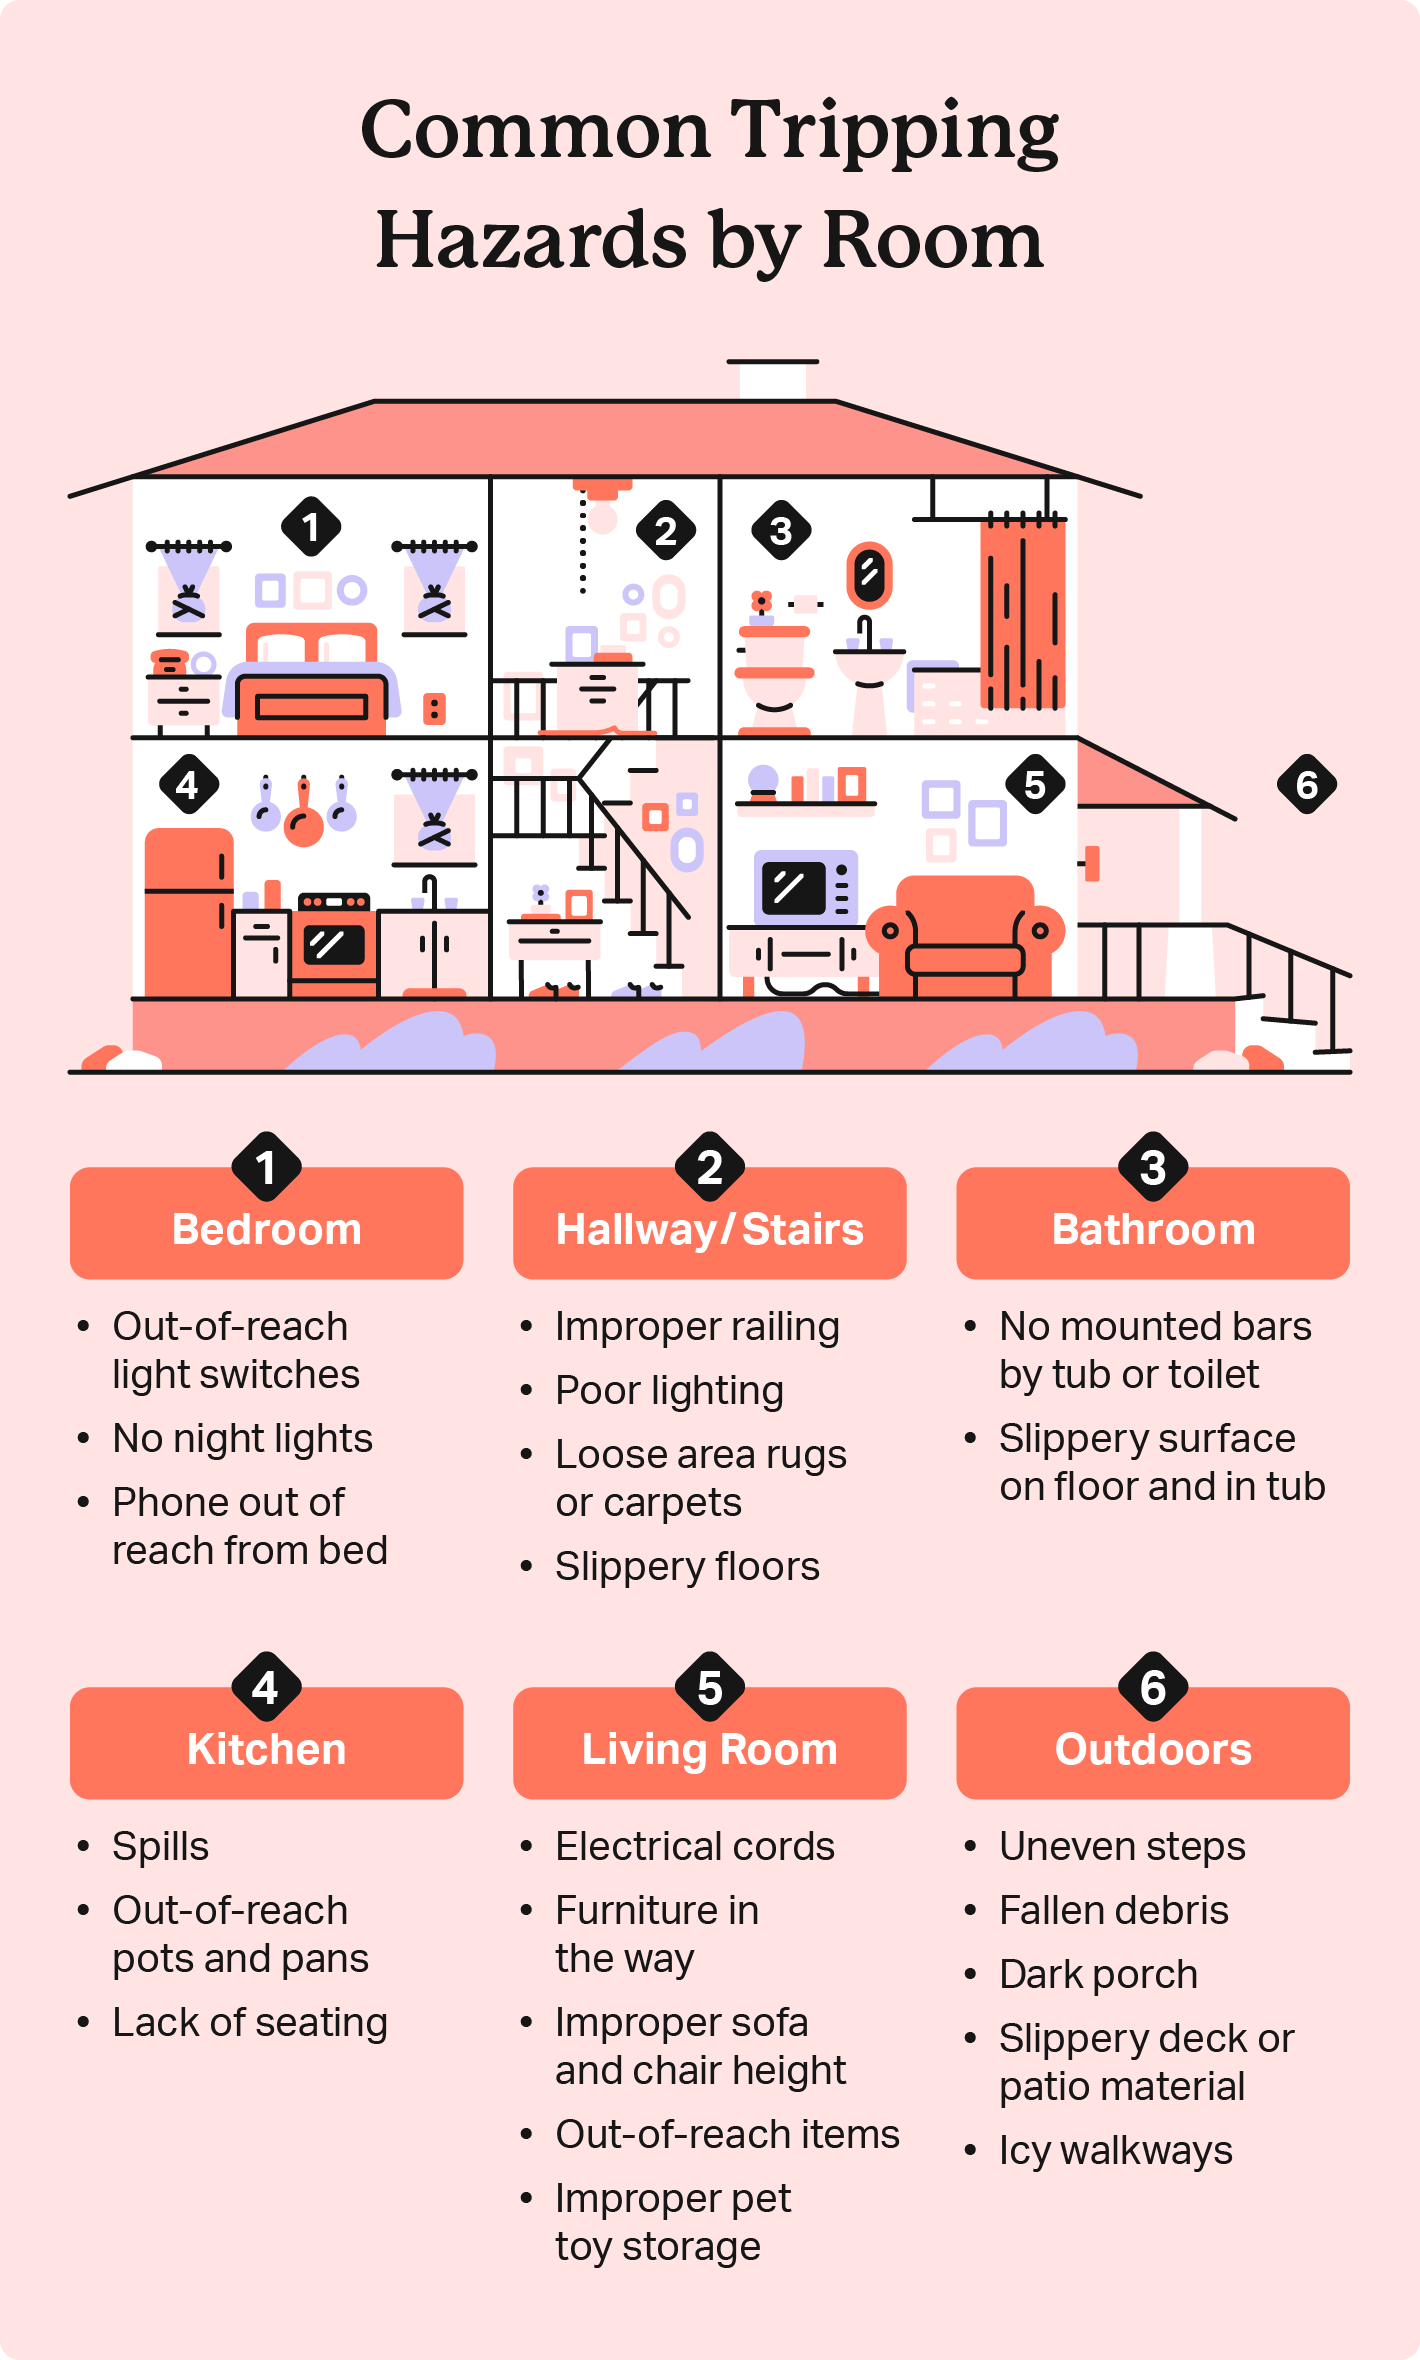 An illustration shows a bisected house with 5 rooms and an outdoors and lists common tripping hazards by location. 